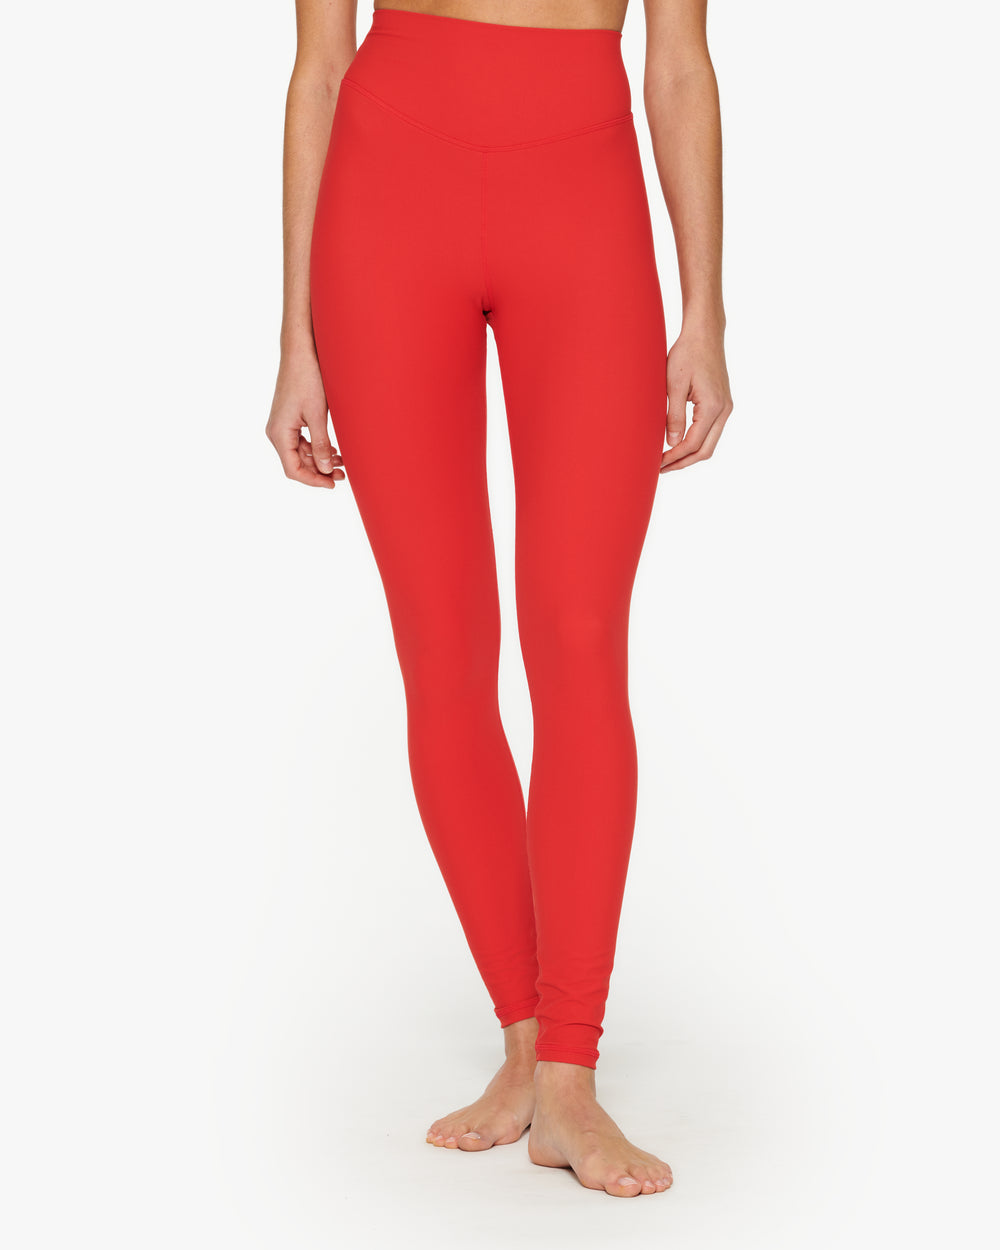 The Upside Peached 28" High-Rise Legging